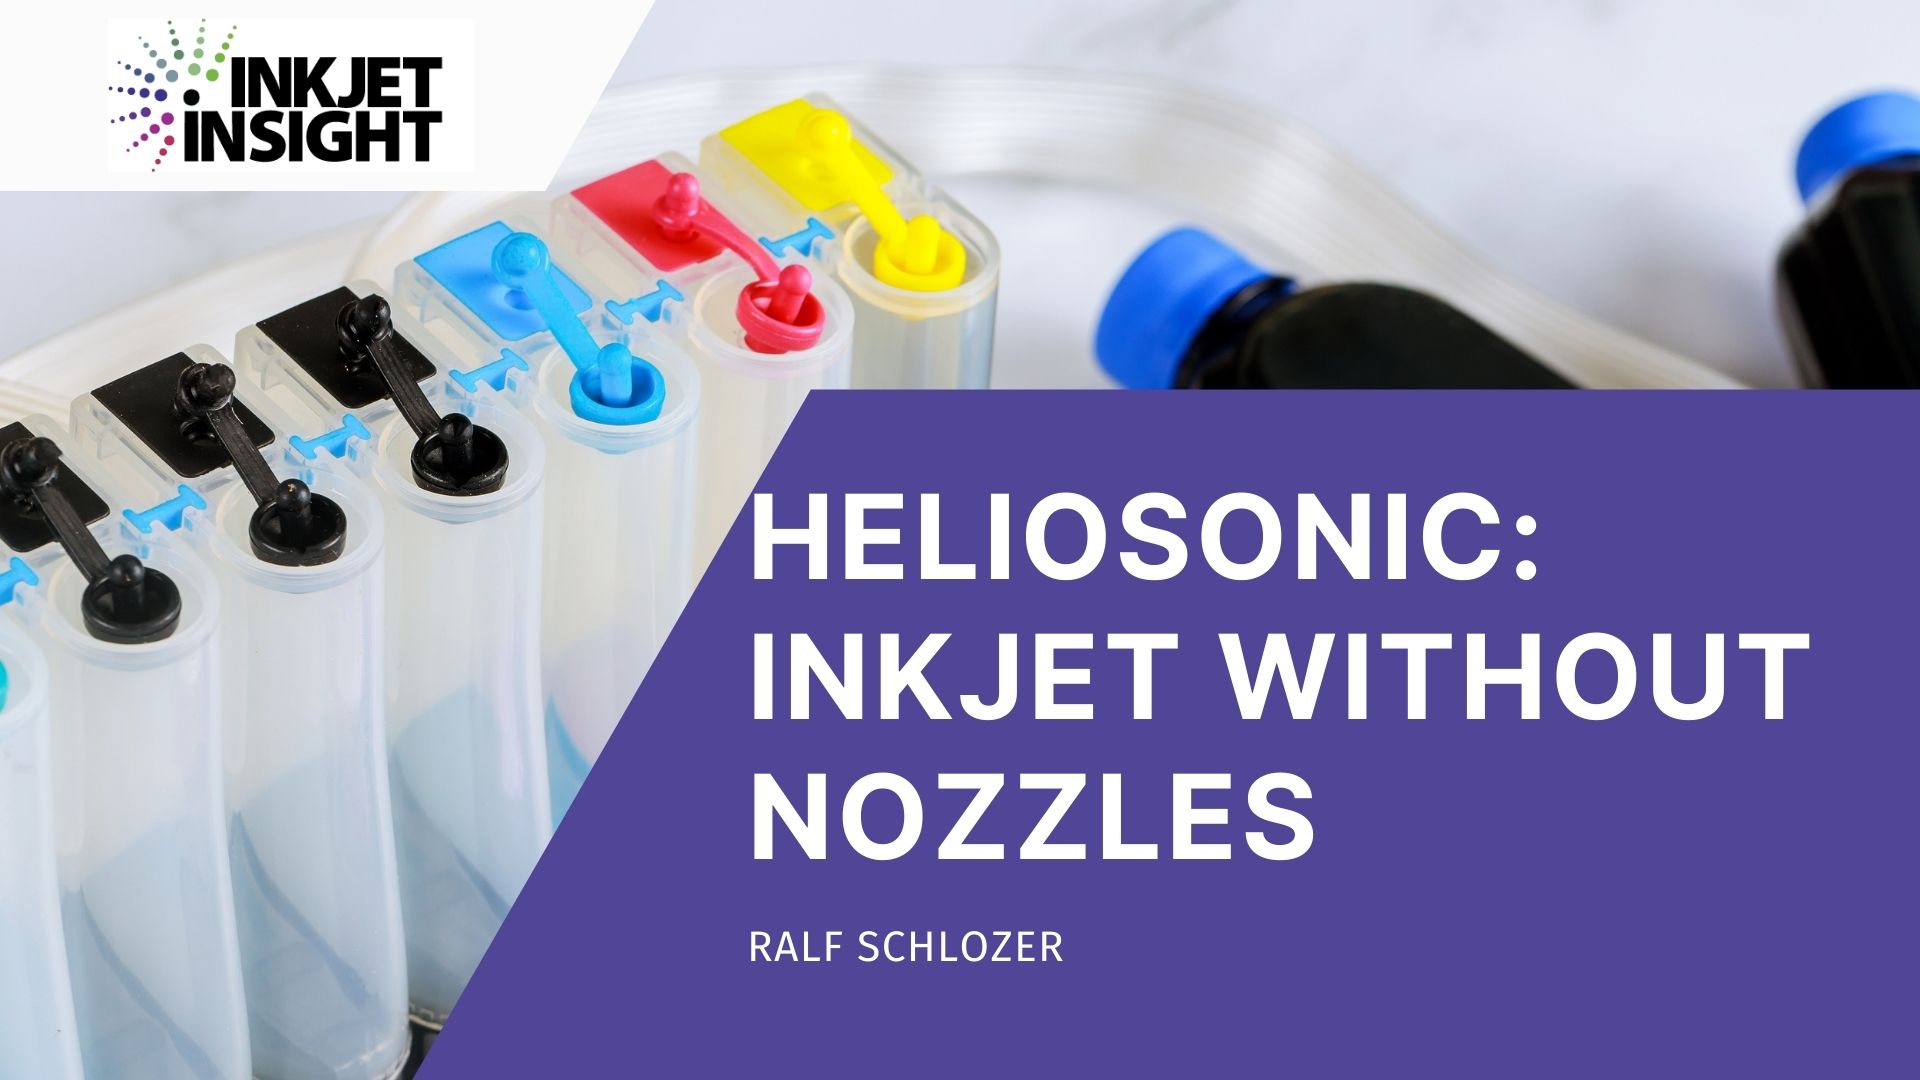 Featured image for “Heliosonic: Inkjet Without Nozzles”